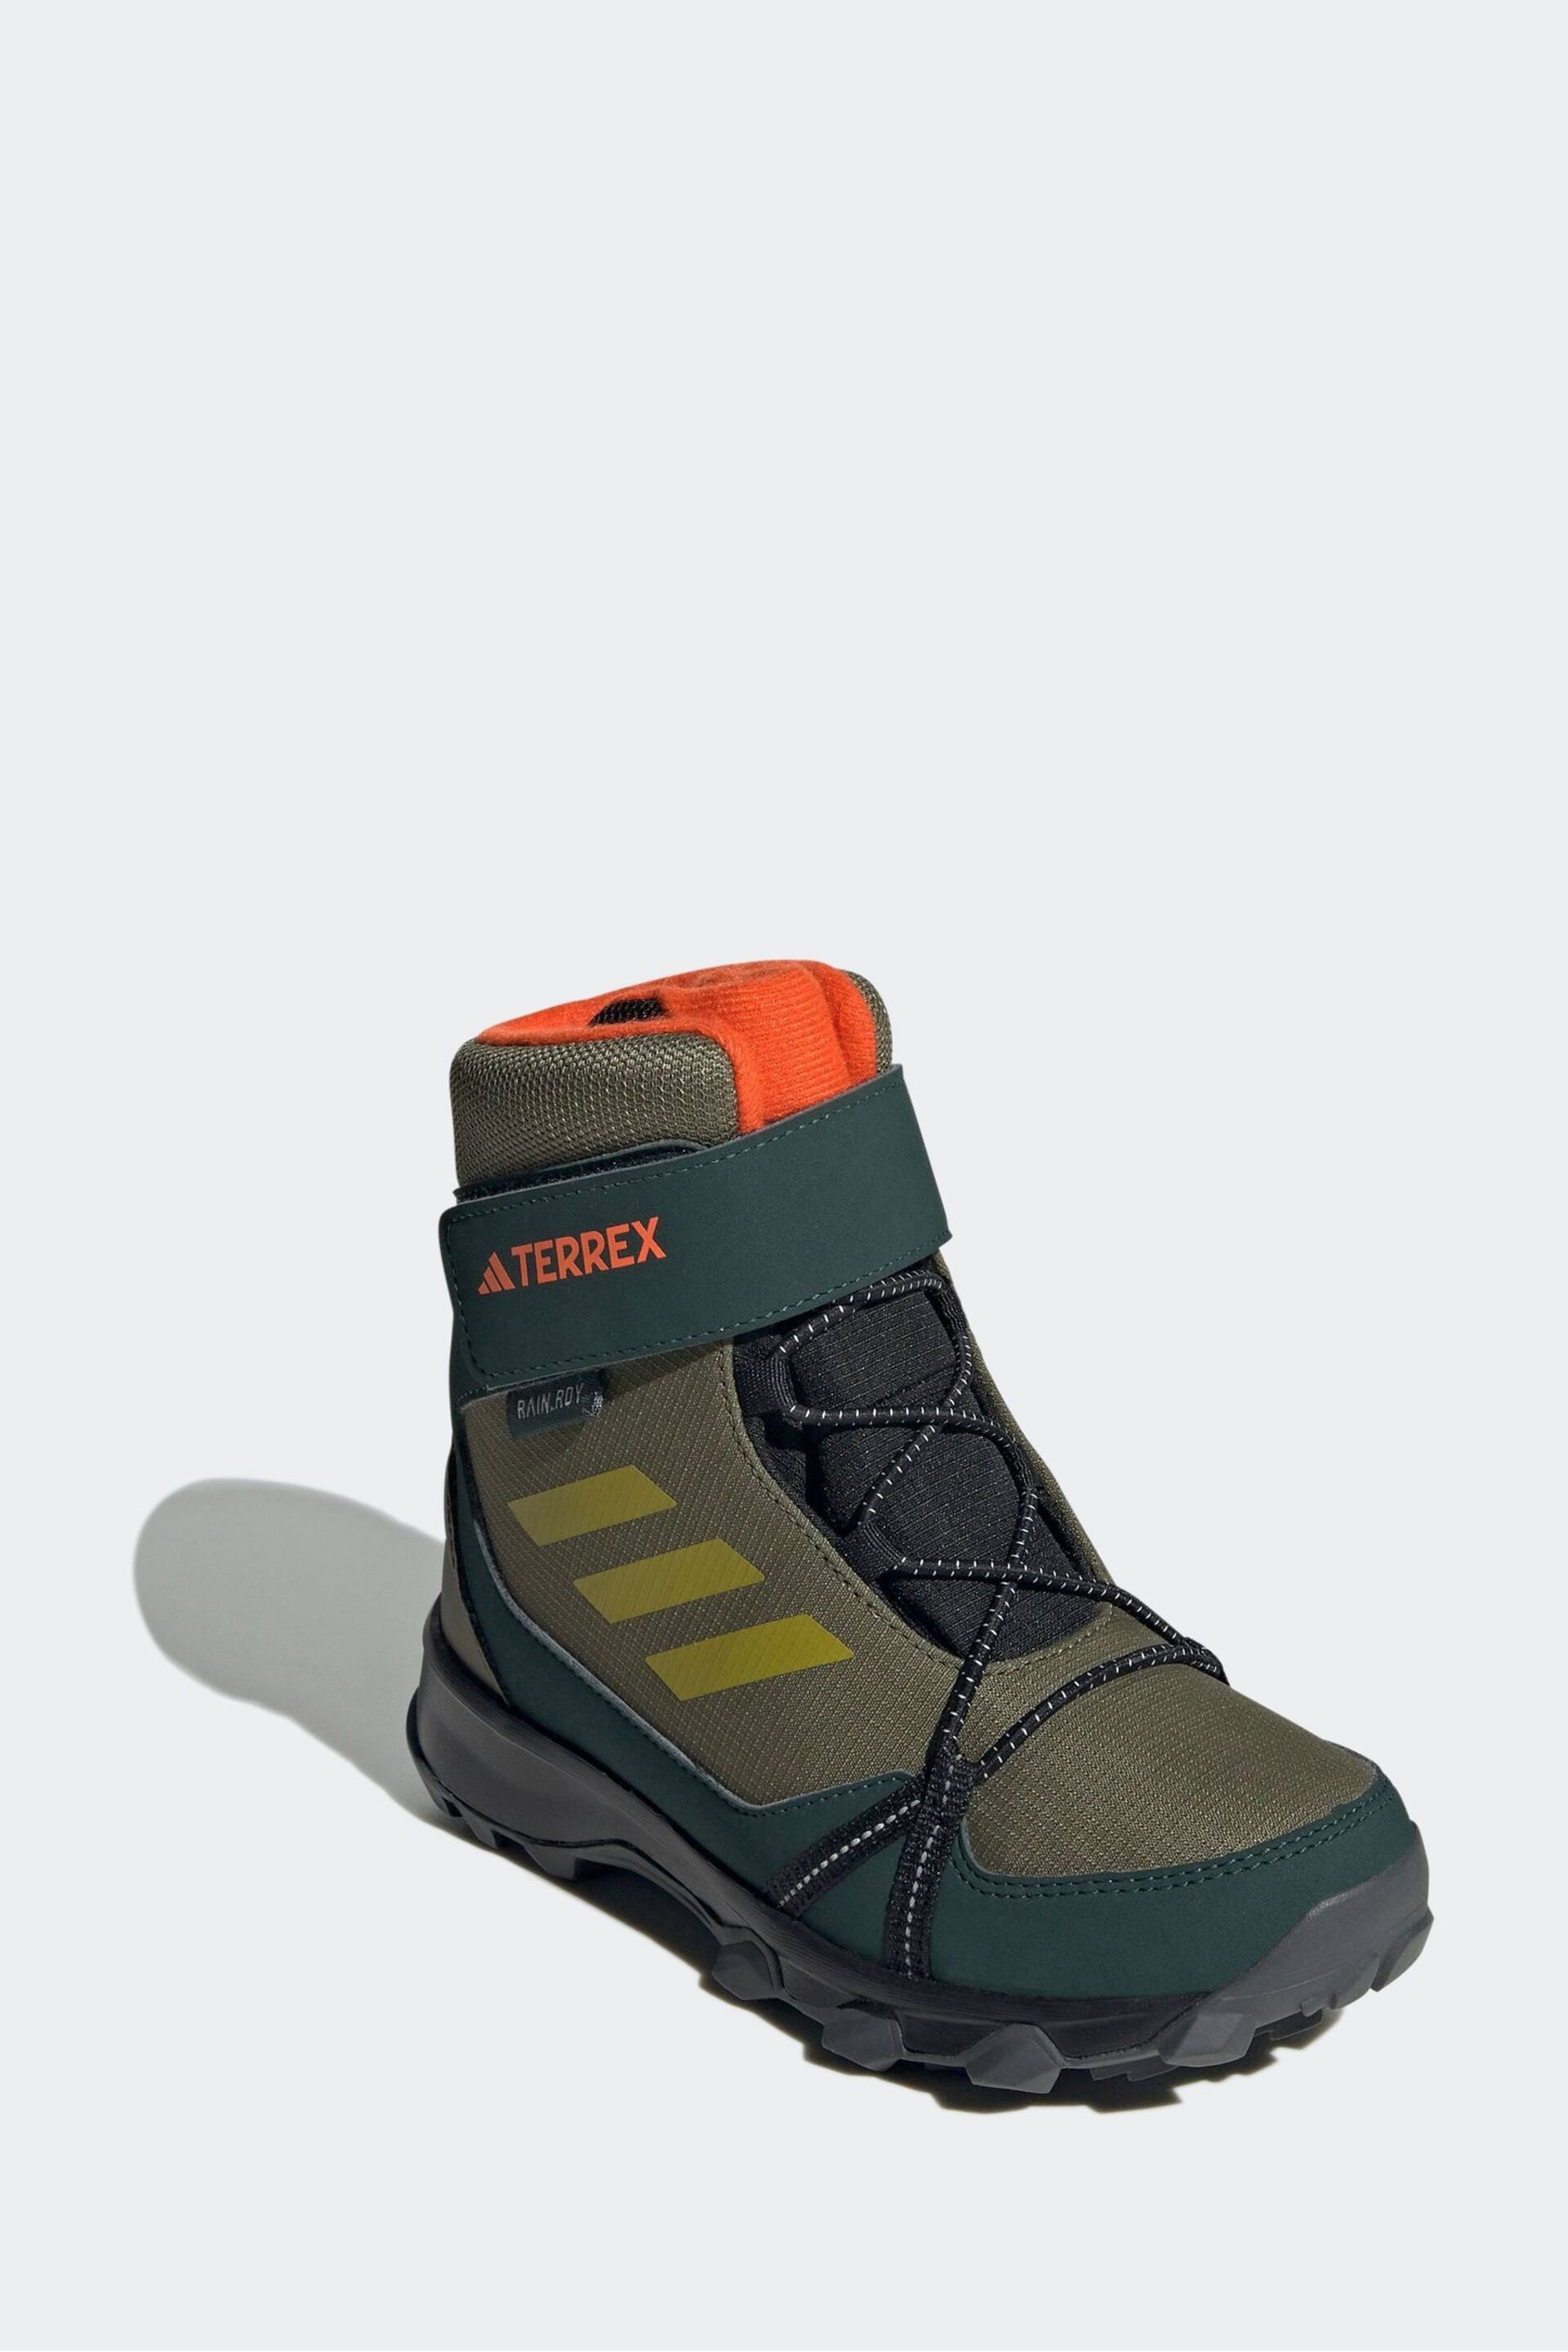 adidas Green Terrex Snow Hook-And-Loop Cold.Rdy Winter Boots - Image 3 of 9